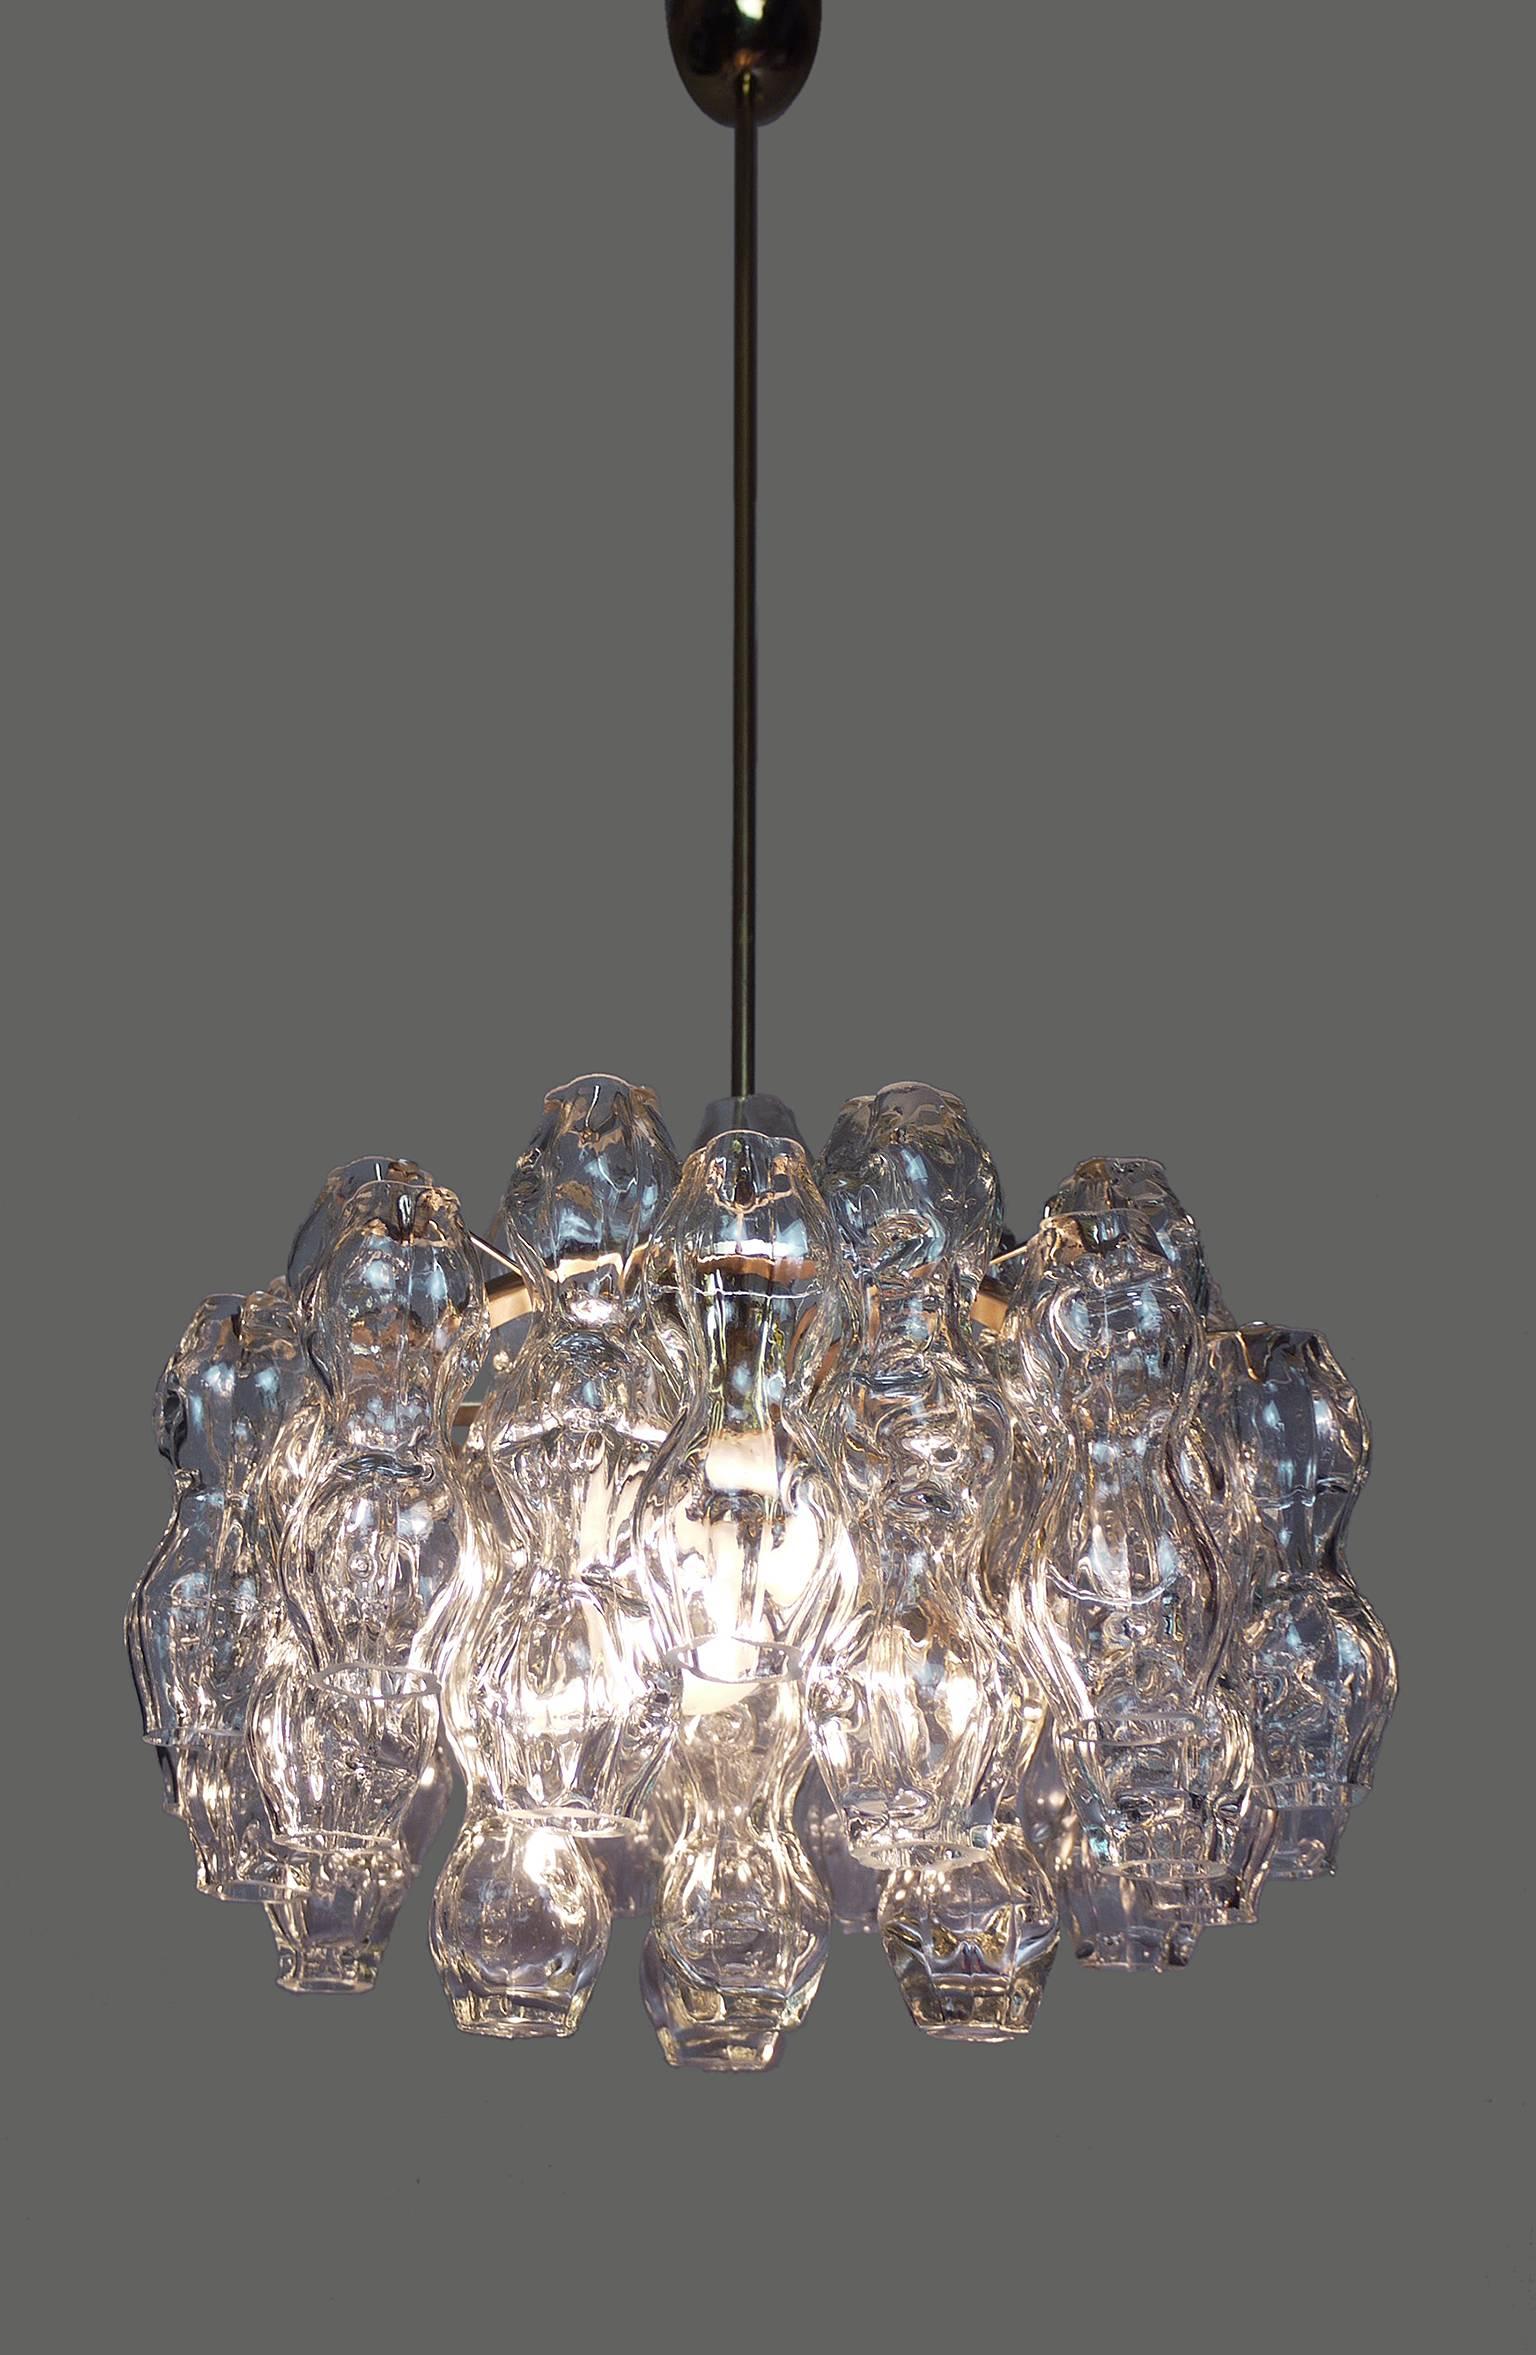 Blown Murano bubble glass chandelier made by Doria, Germany in the 1960s.
Brass frame with three large Edison base bulbs.
Labeled with Doria.
 